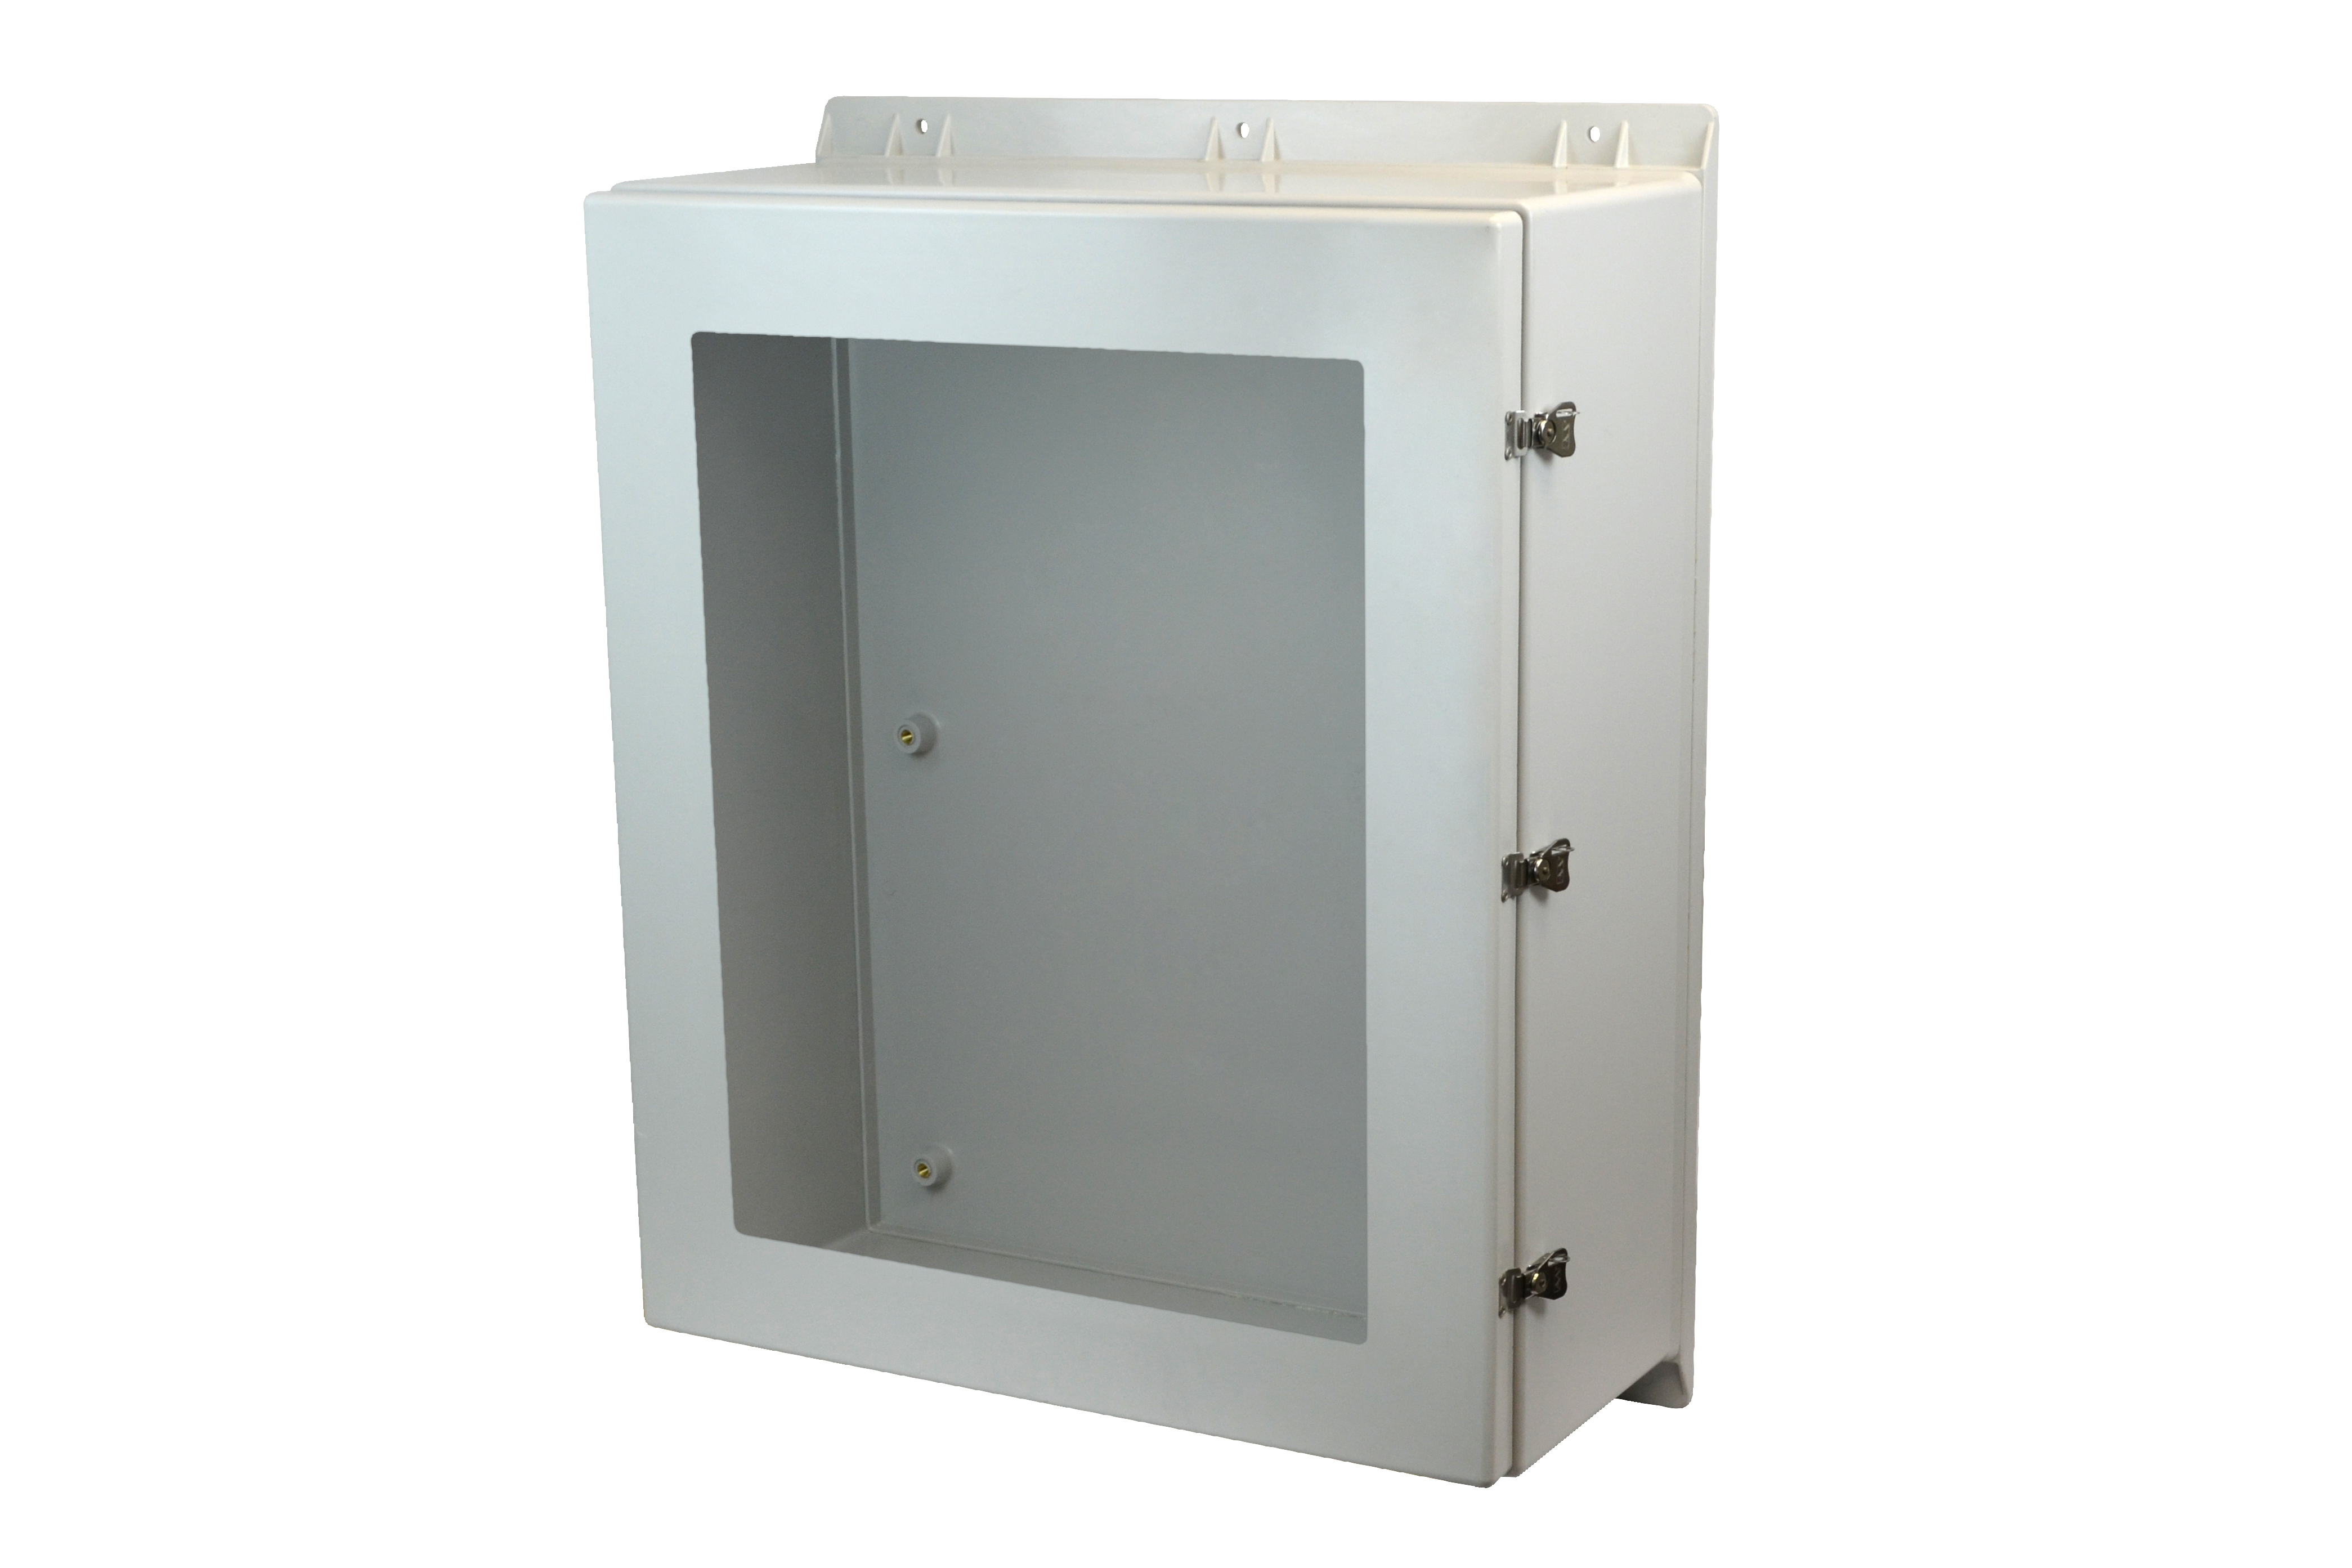 AMEC363012TW Fiberglass enclosure with hinged window cover and snap latch